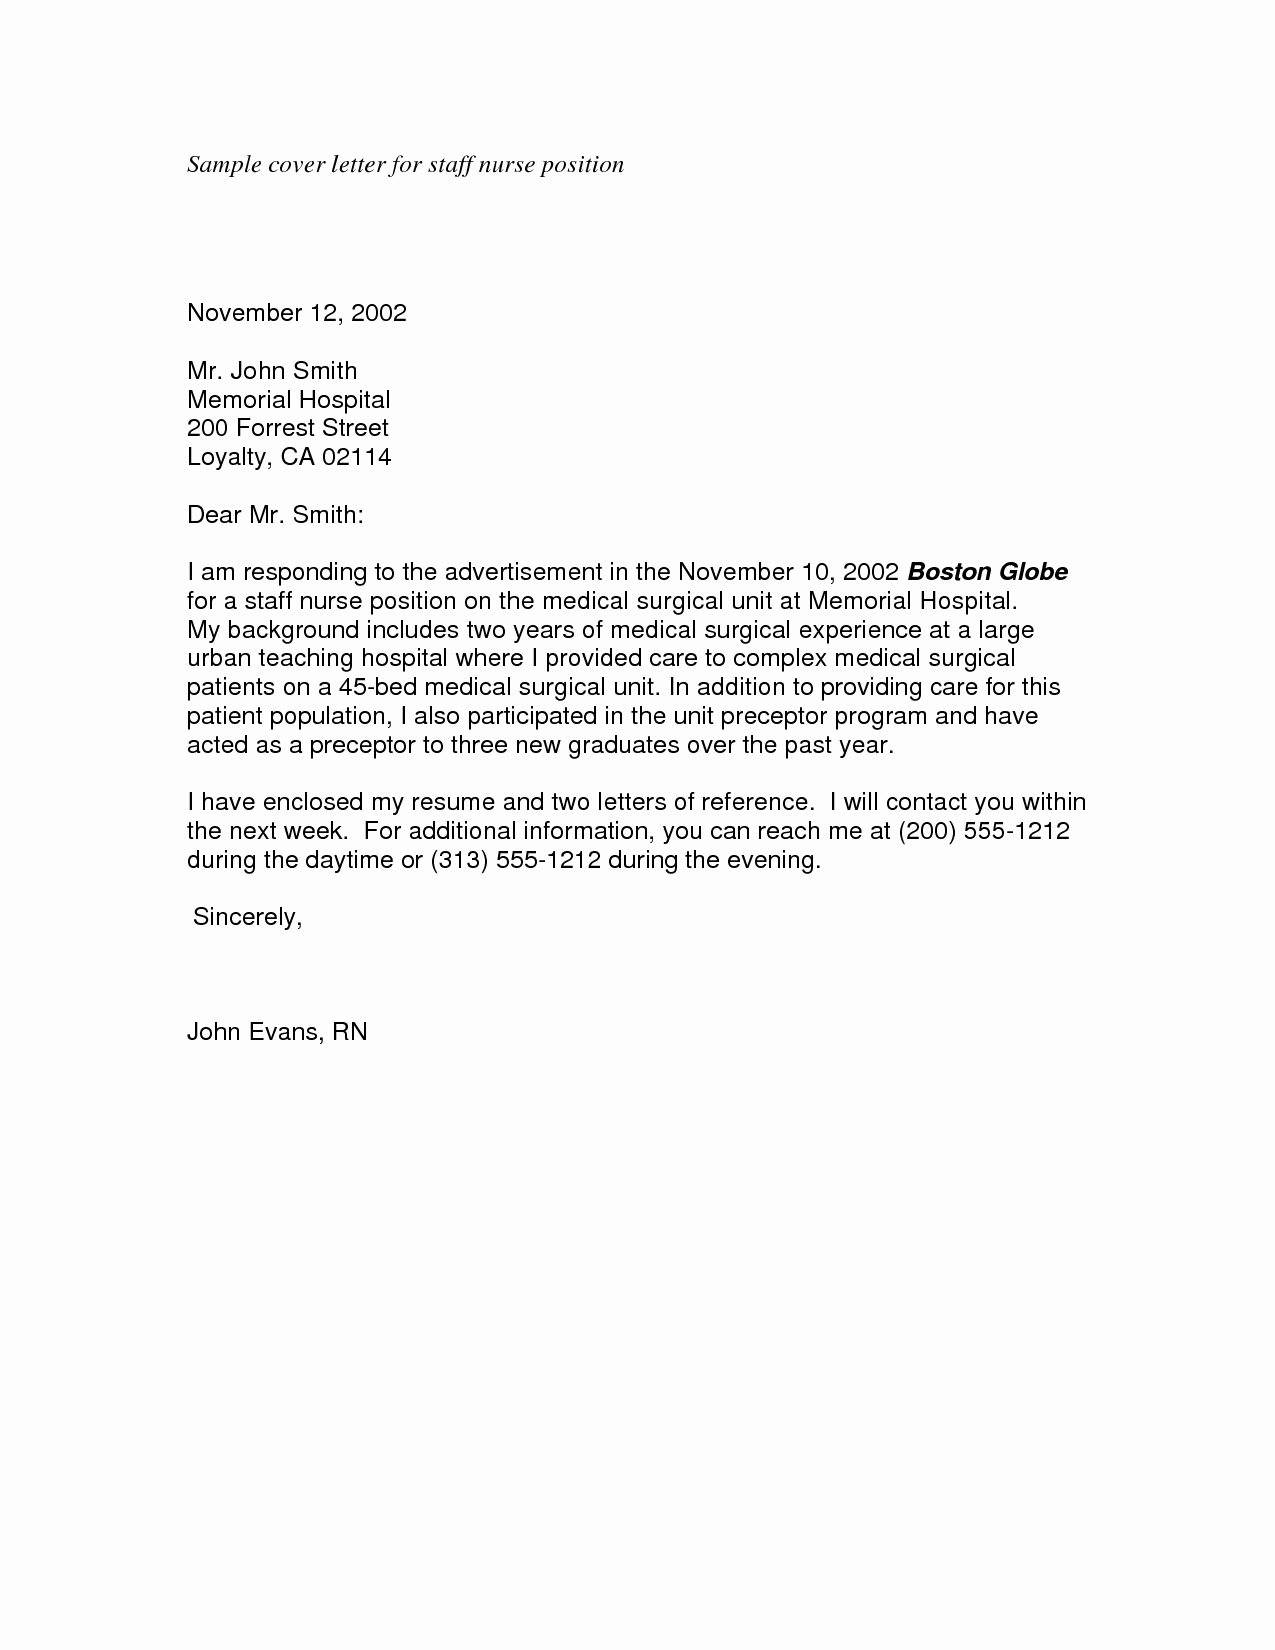 Letters Of Application Examples Lovely Job Application Cover Letter Easy Template Pixsimple Cover